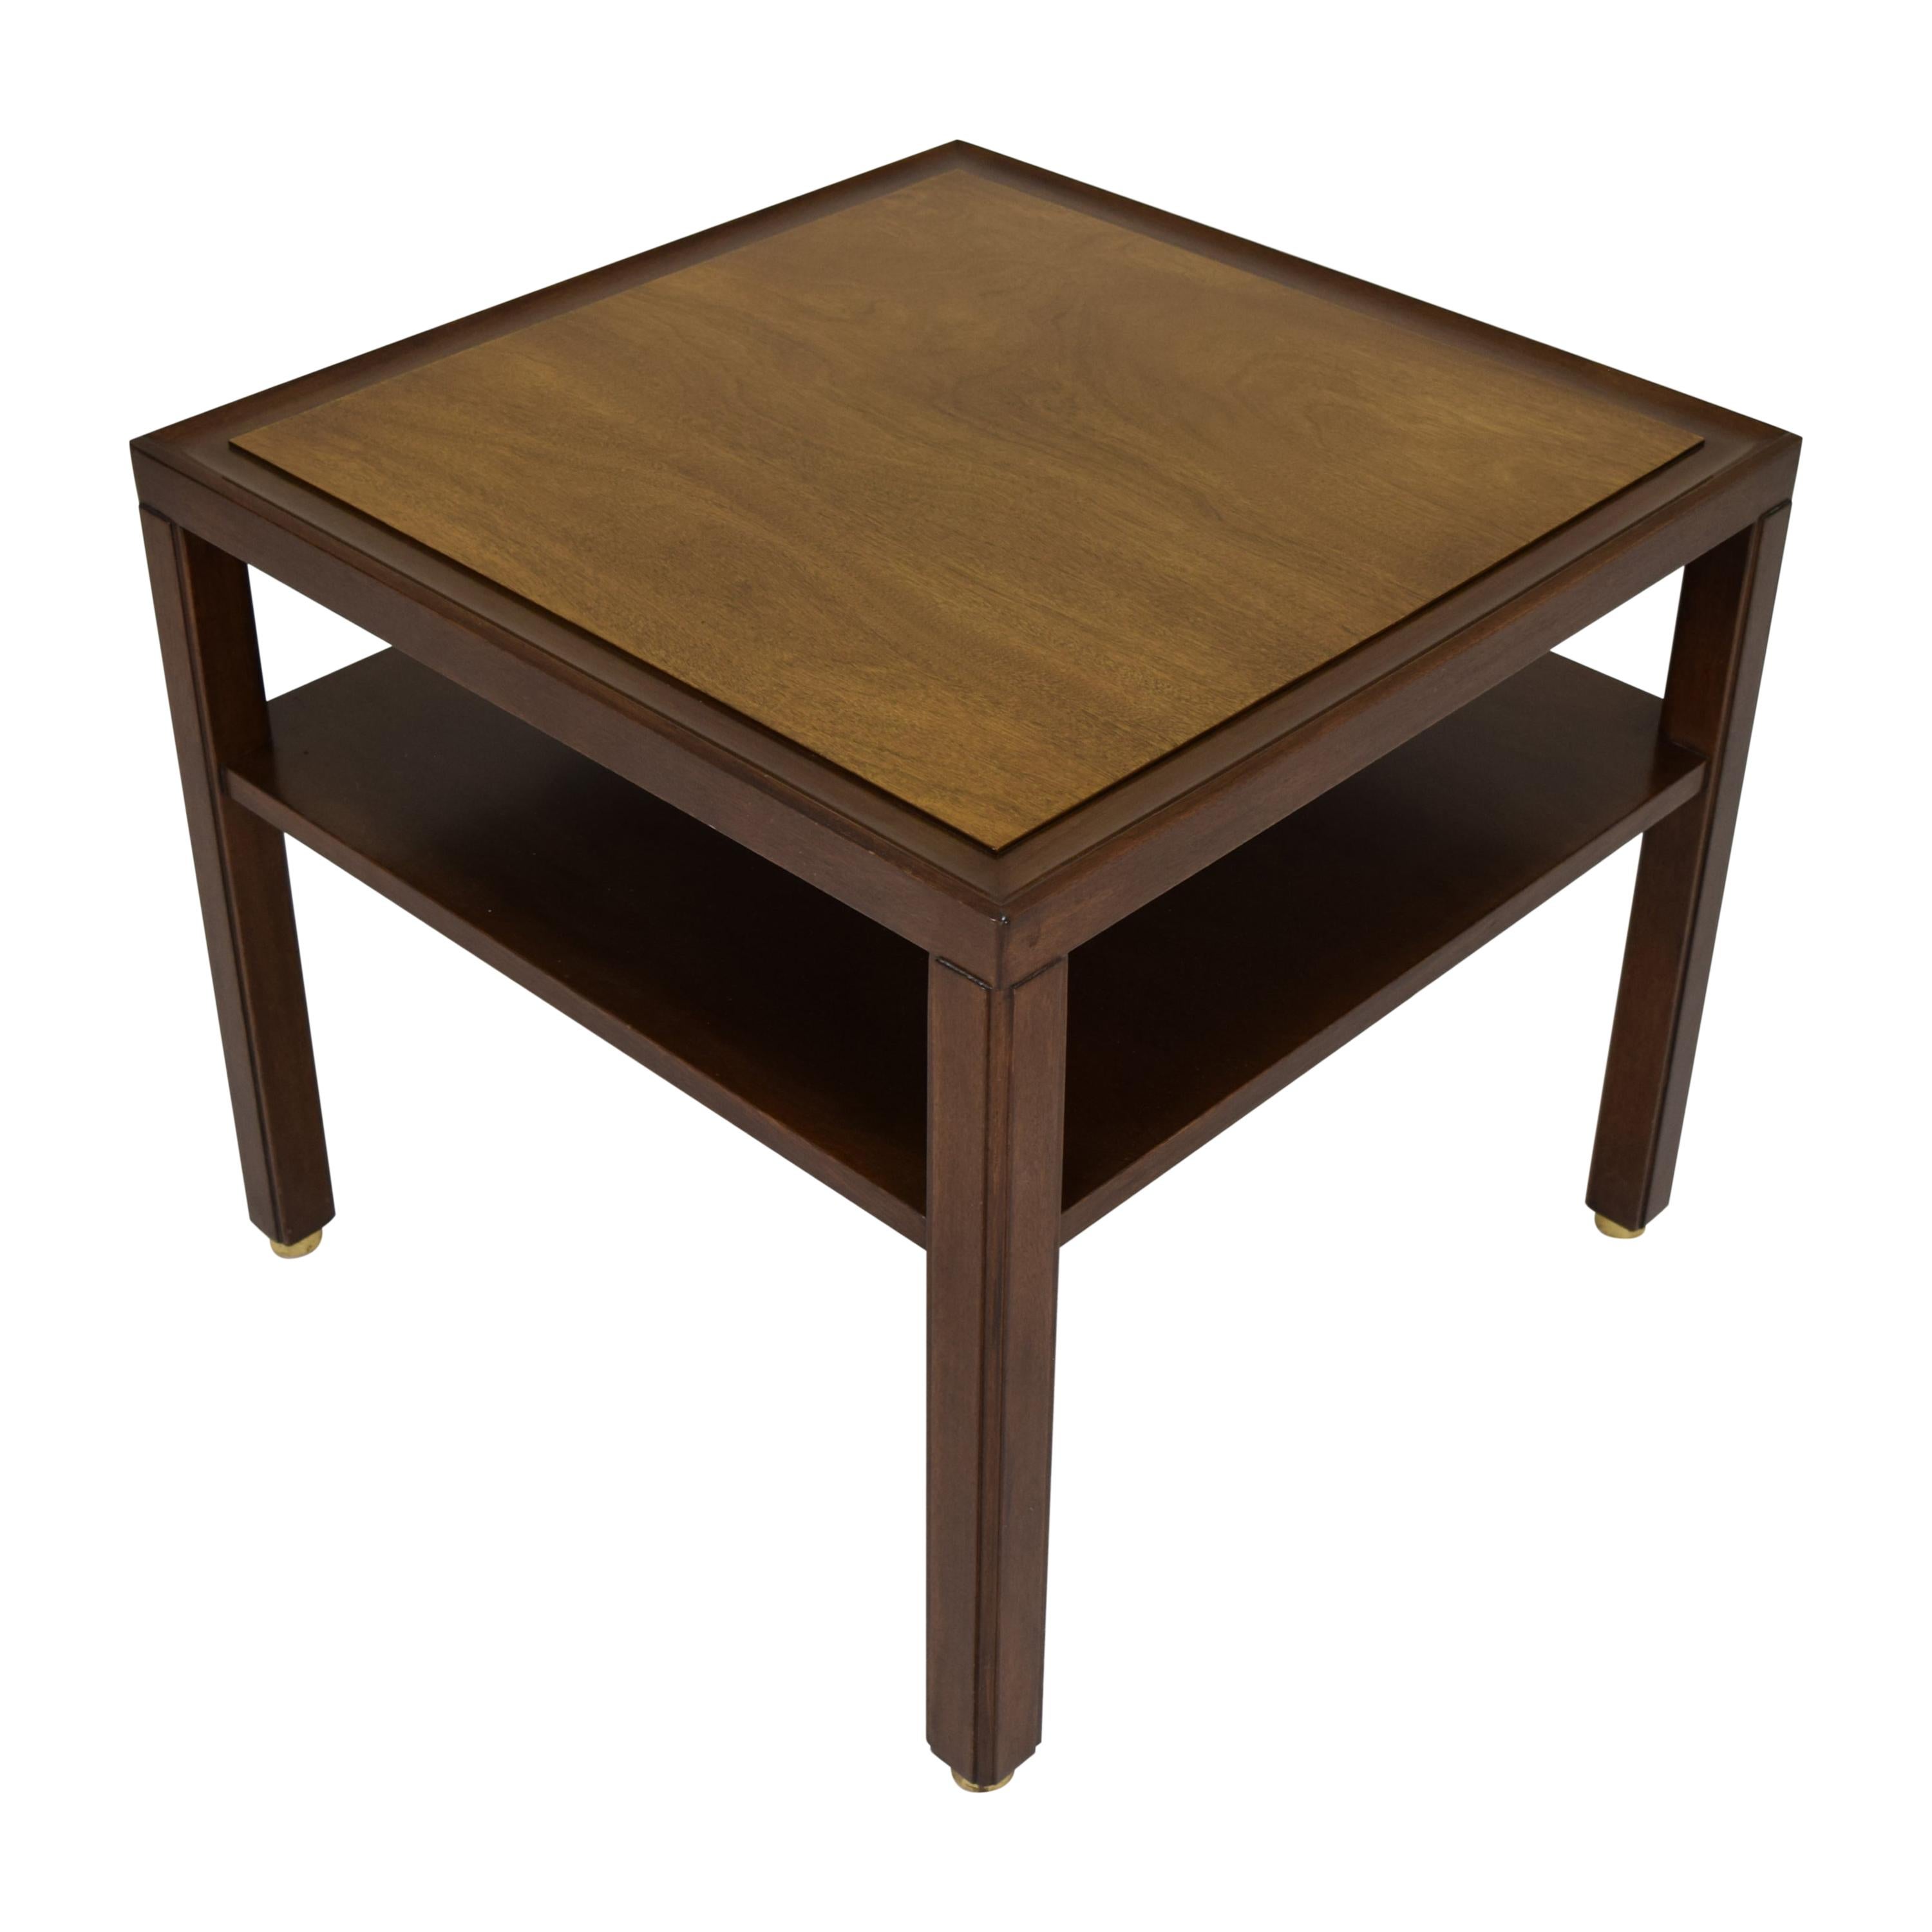 Occasional Table by Dunbar in Walnut with Brass Feet